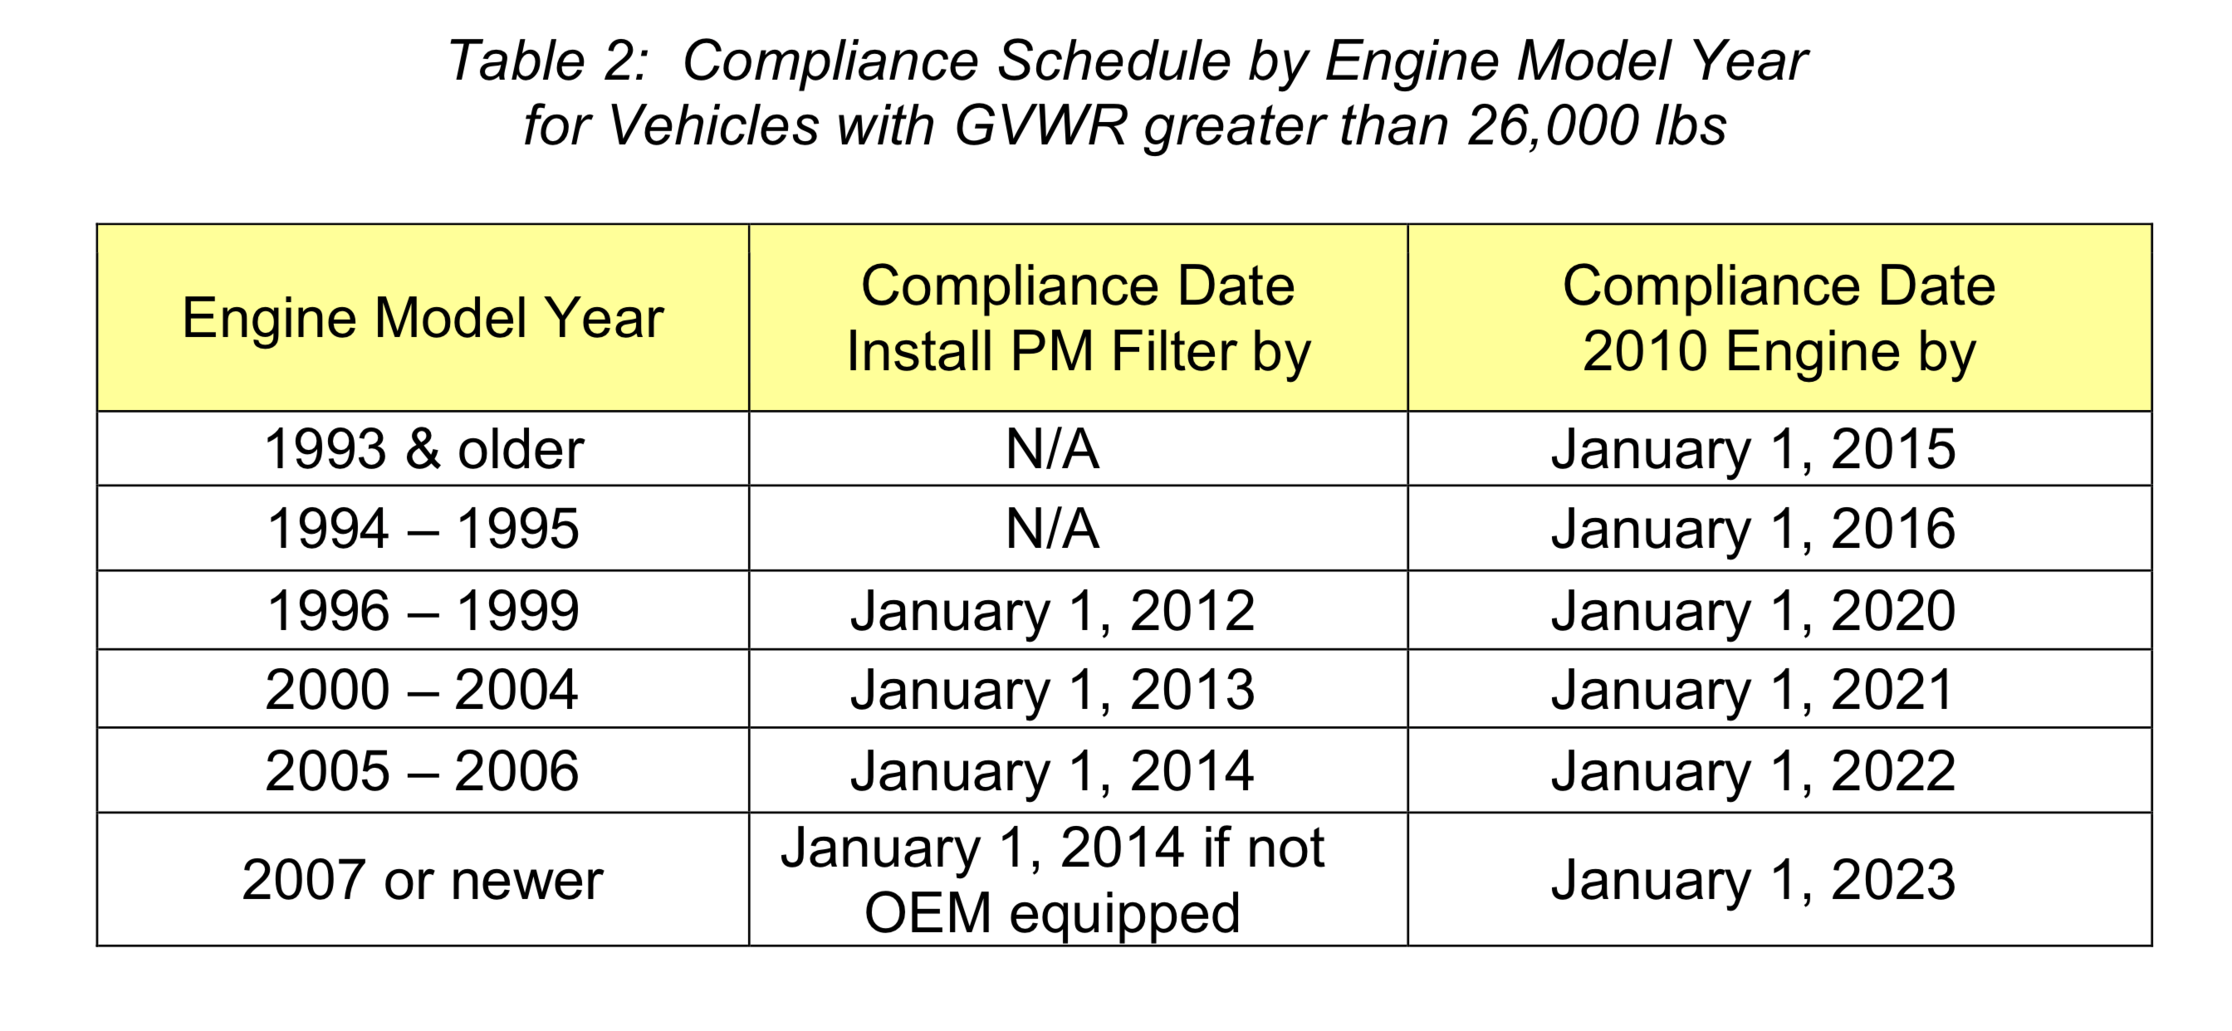 Compliance Schedule by Engine Model Year for Vehicles with GVWR greater than 26,000 lbs.